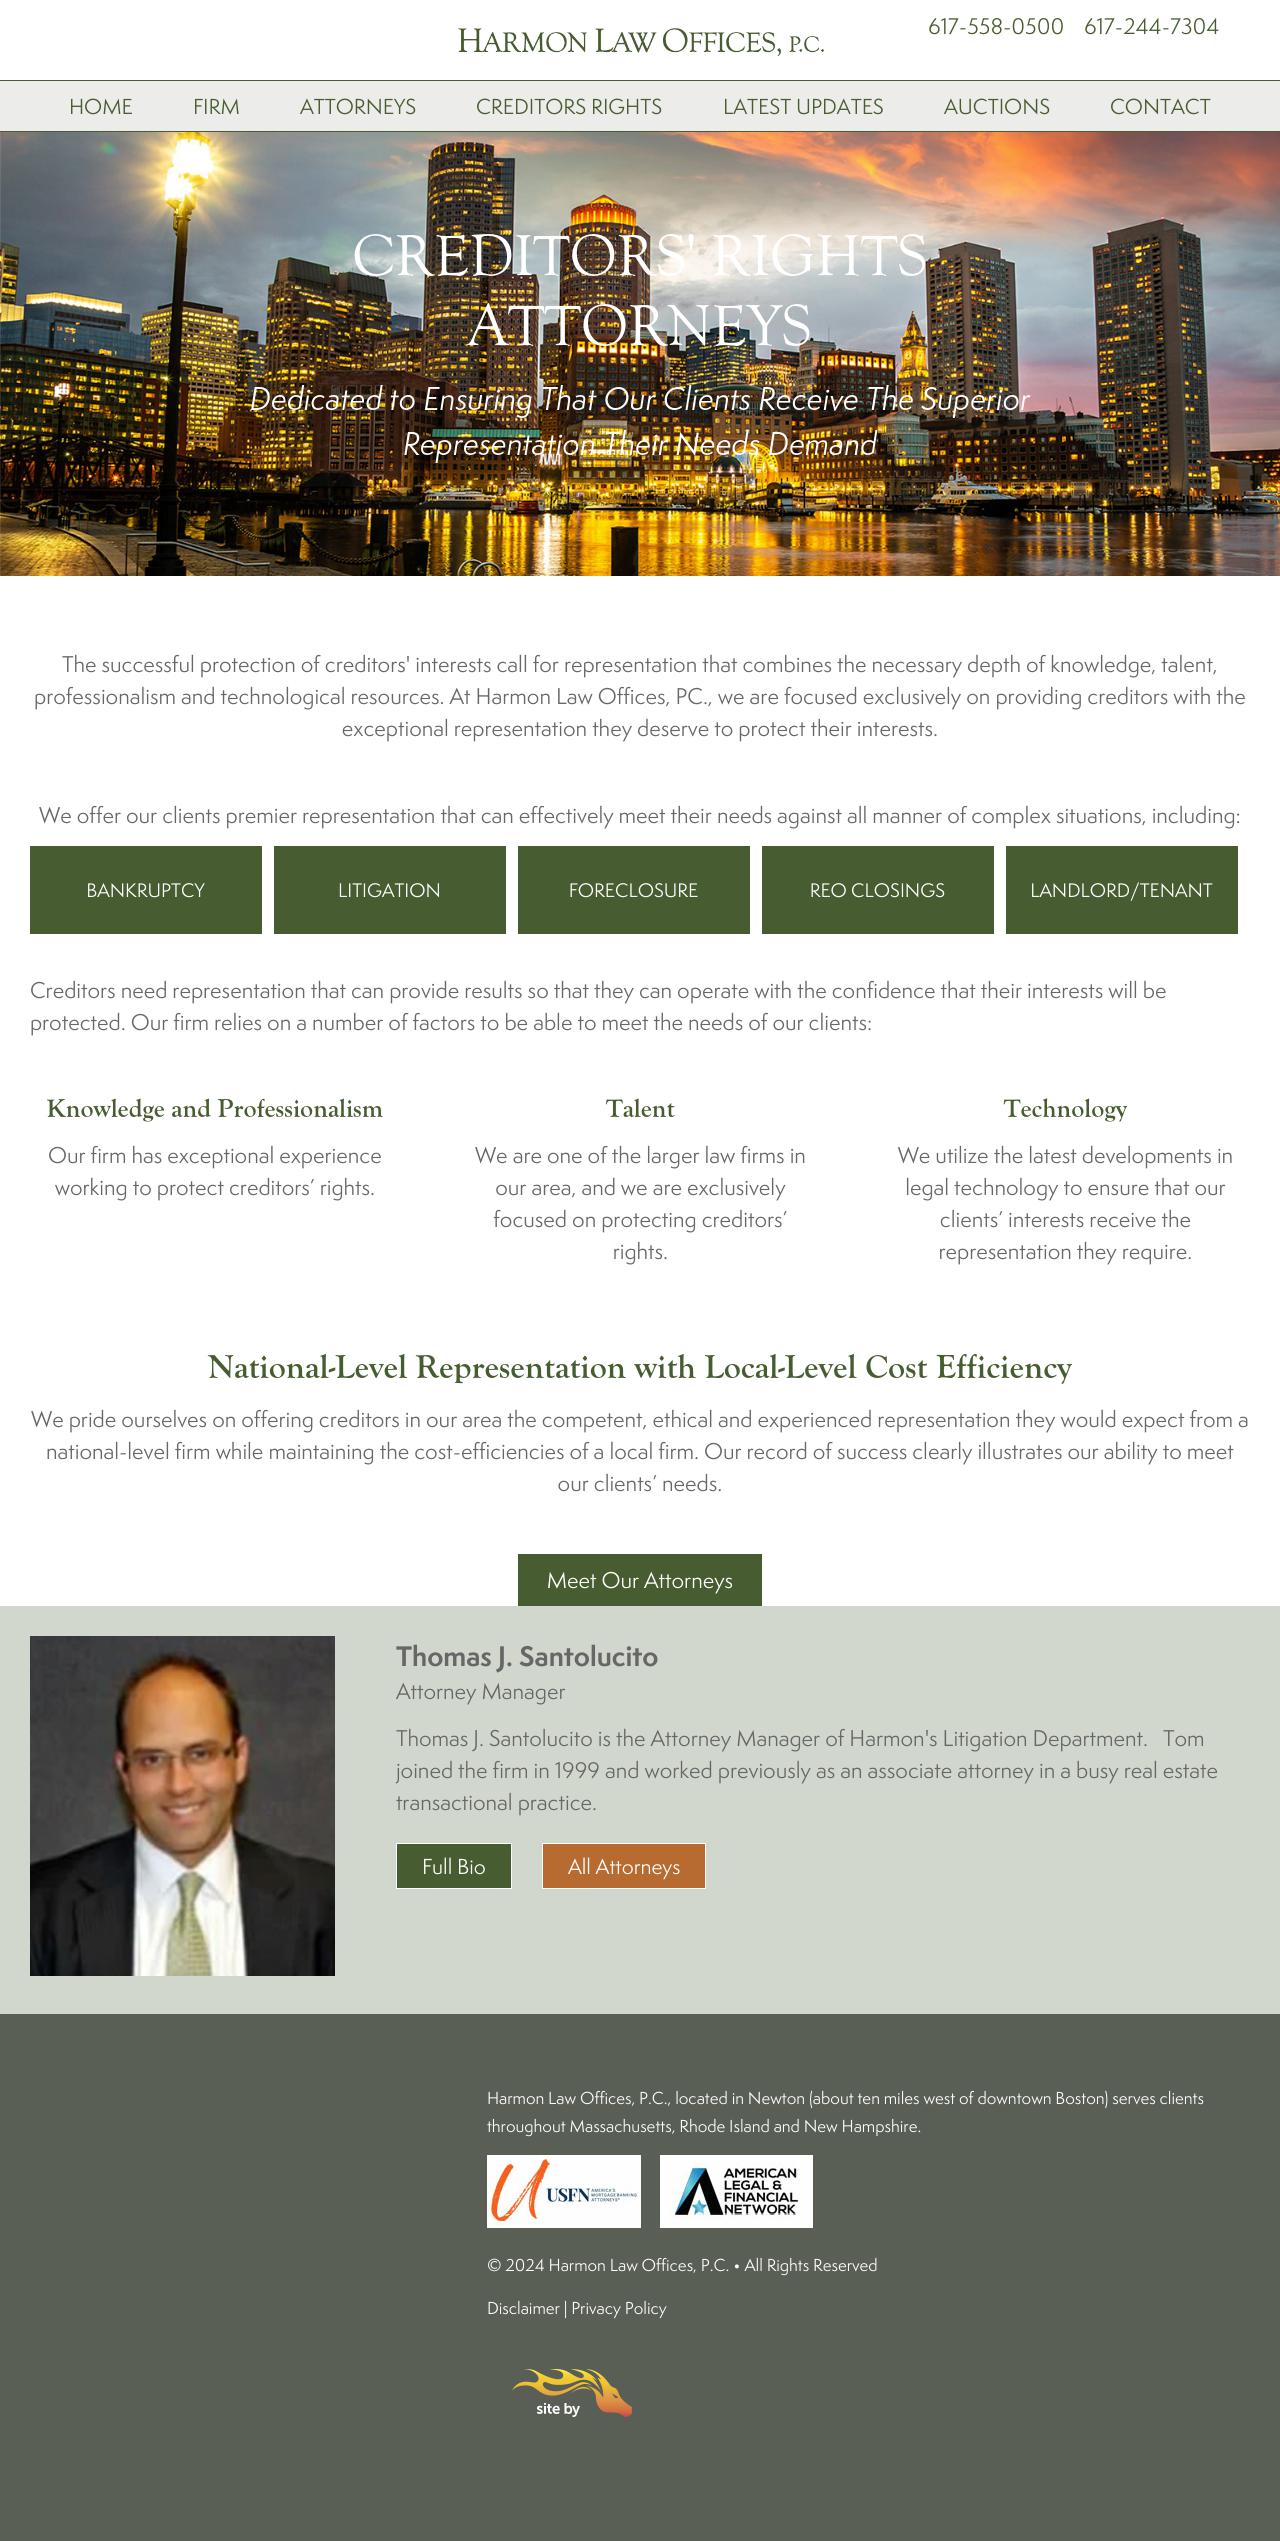 Harmon Law Offices, P.C. - Newton MA Lawyers